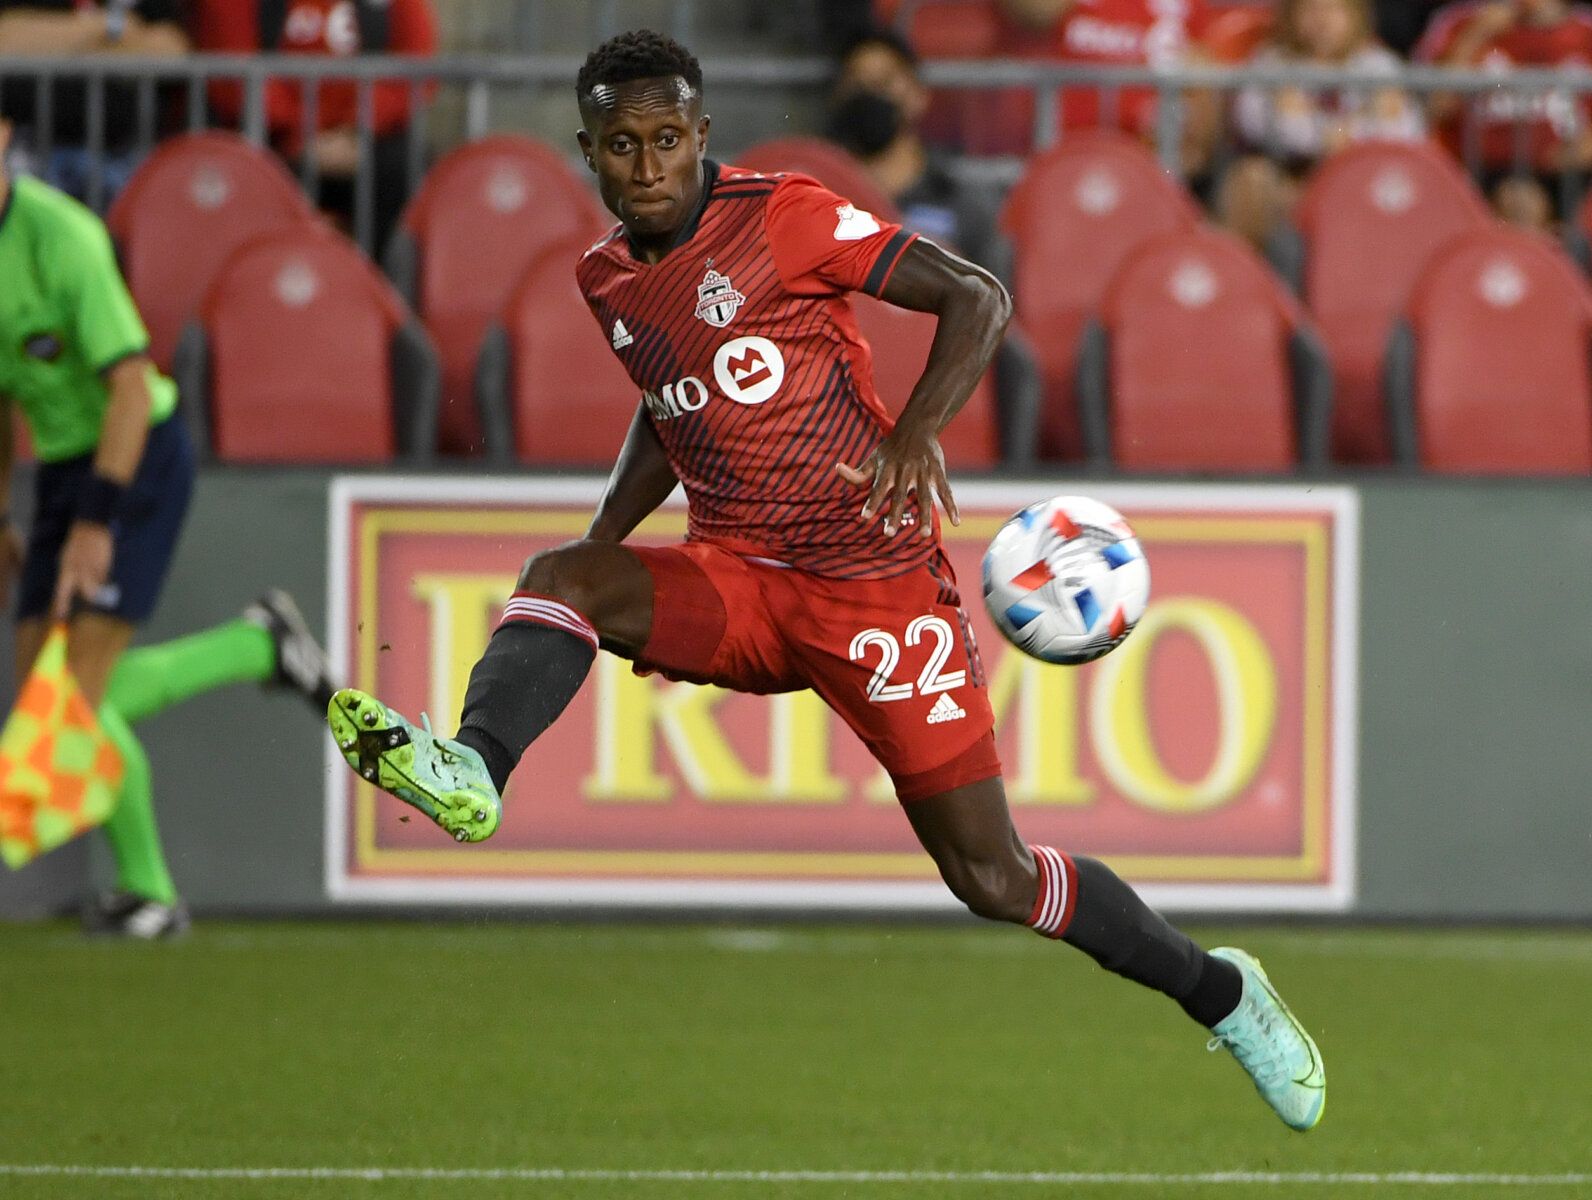 Aug 14, 2021; Toronto, Ontario, CAN;  Toronto FC defender Richie Laryea (22) passes the ball against the New England Revolution in the second half at BMO Field. Mandatory Credit: Dan Hamilton-USA TODAY Sports